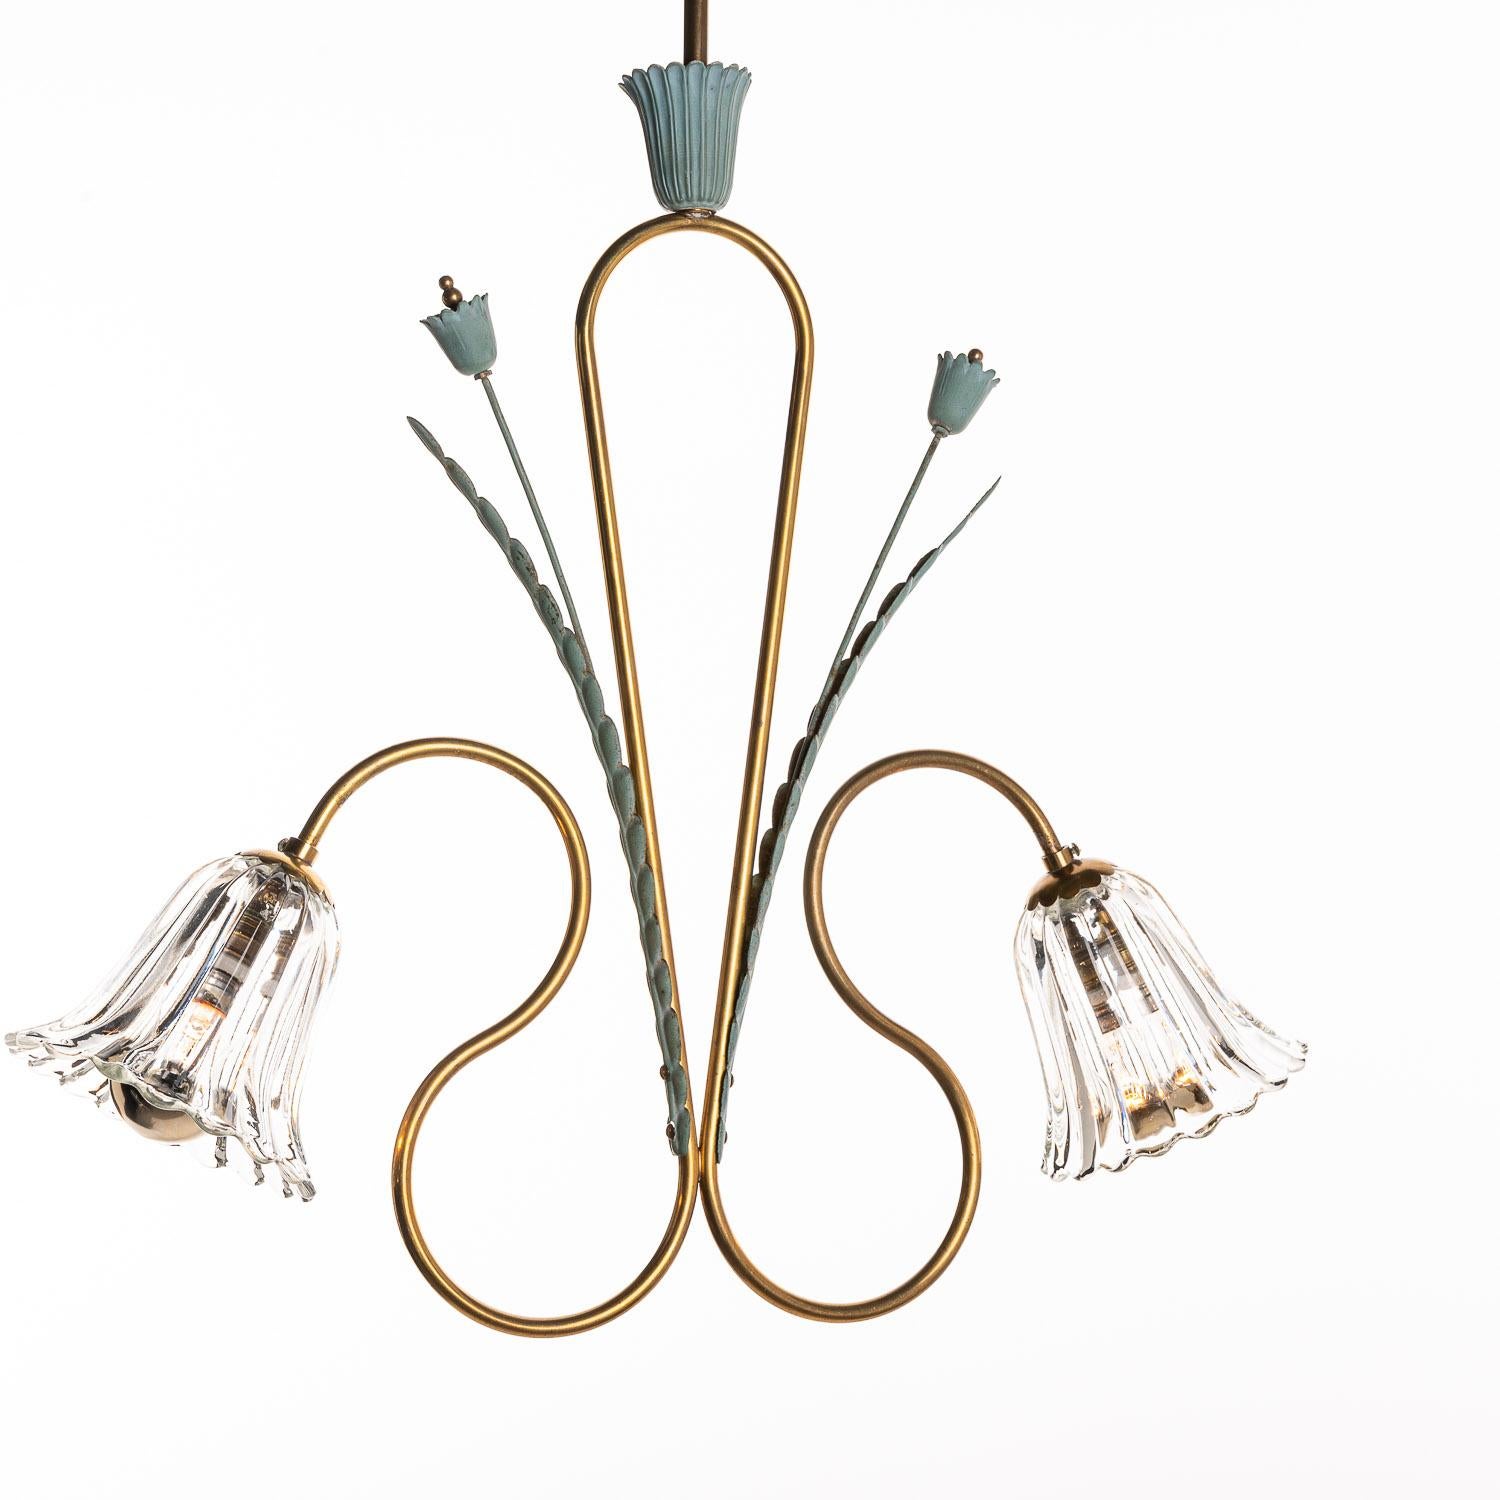 This is a beautiful brass, polychromed metal and glass piece in the style of Pietro Chiesa. It embraces elegant curvature to give a feeling of harmony and flow throughout the design. Two bulbs hidden in flower shaped glass diffuser on beautifully